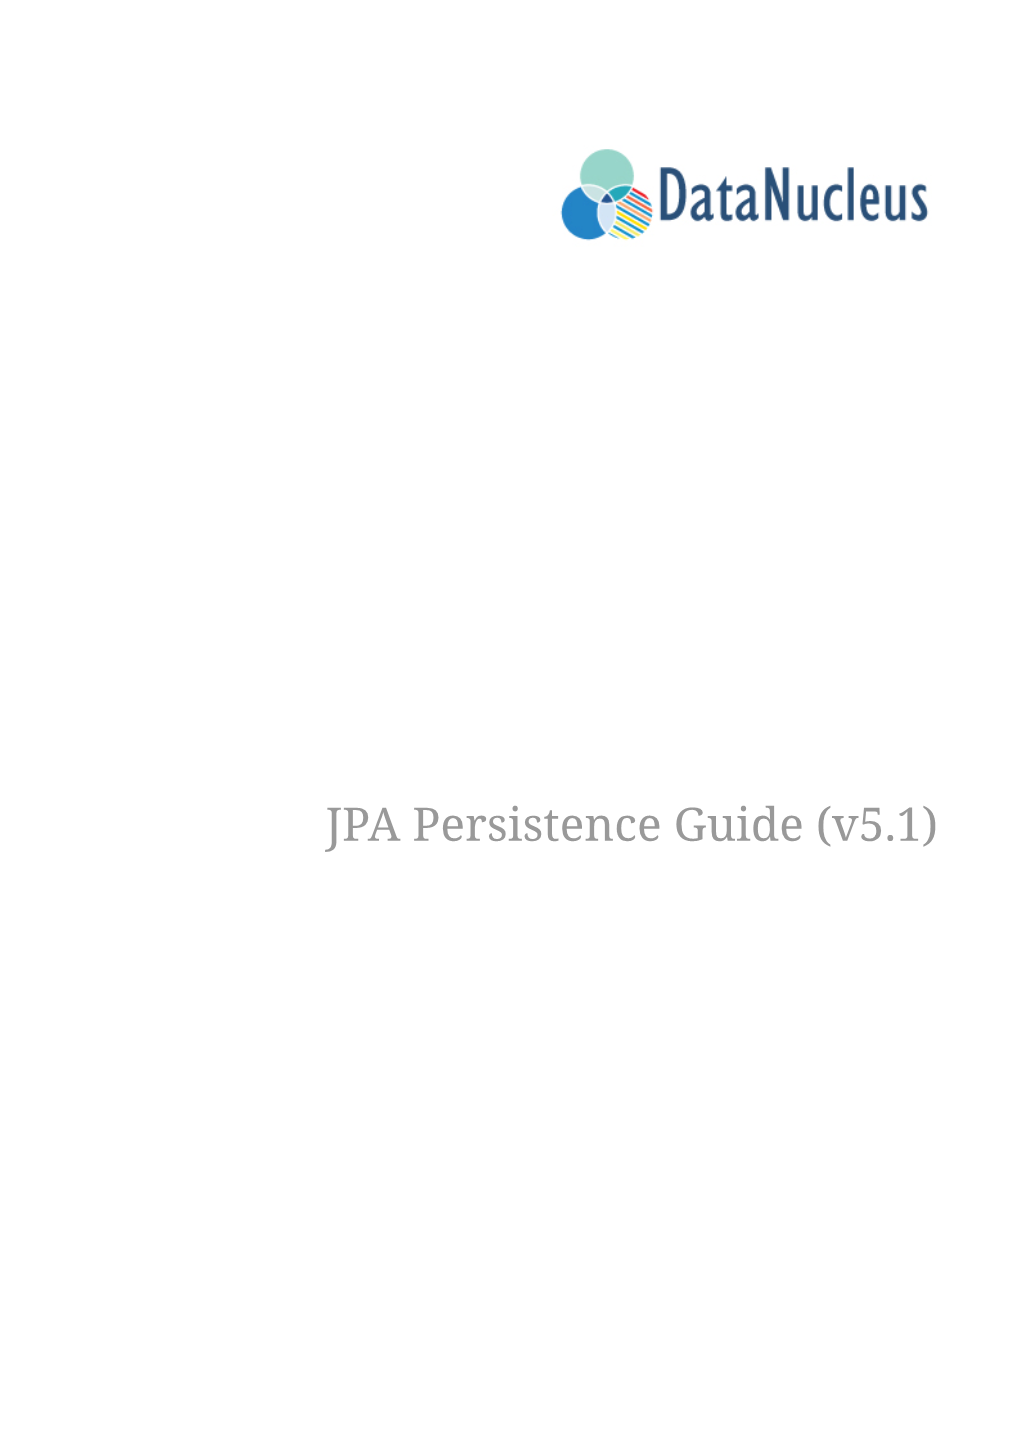 JPA Persistence Guide (V5.1) Table of Contents